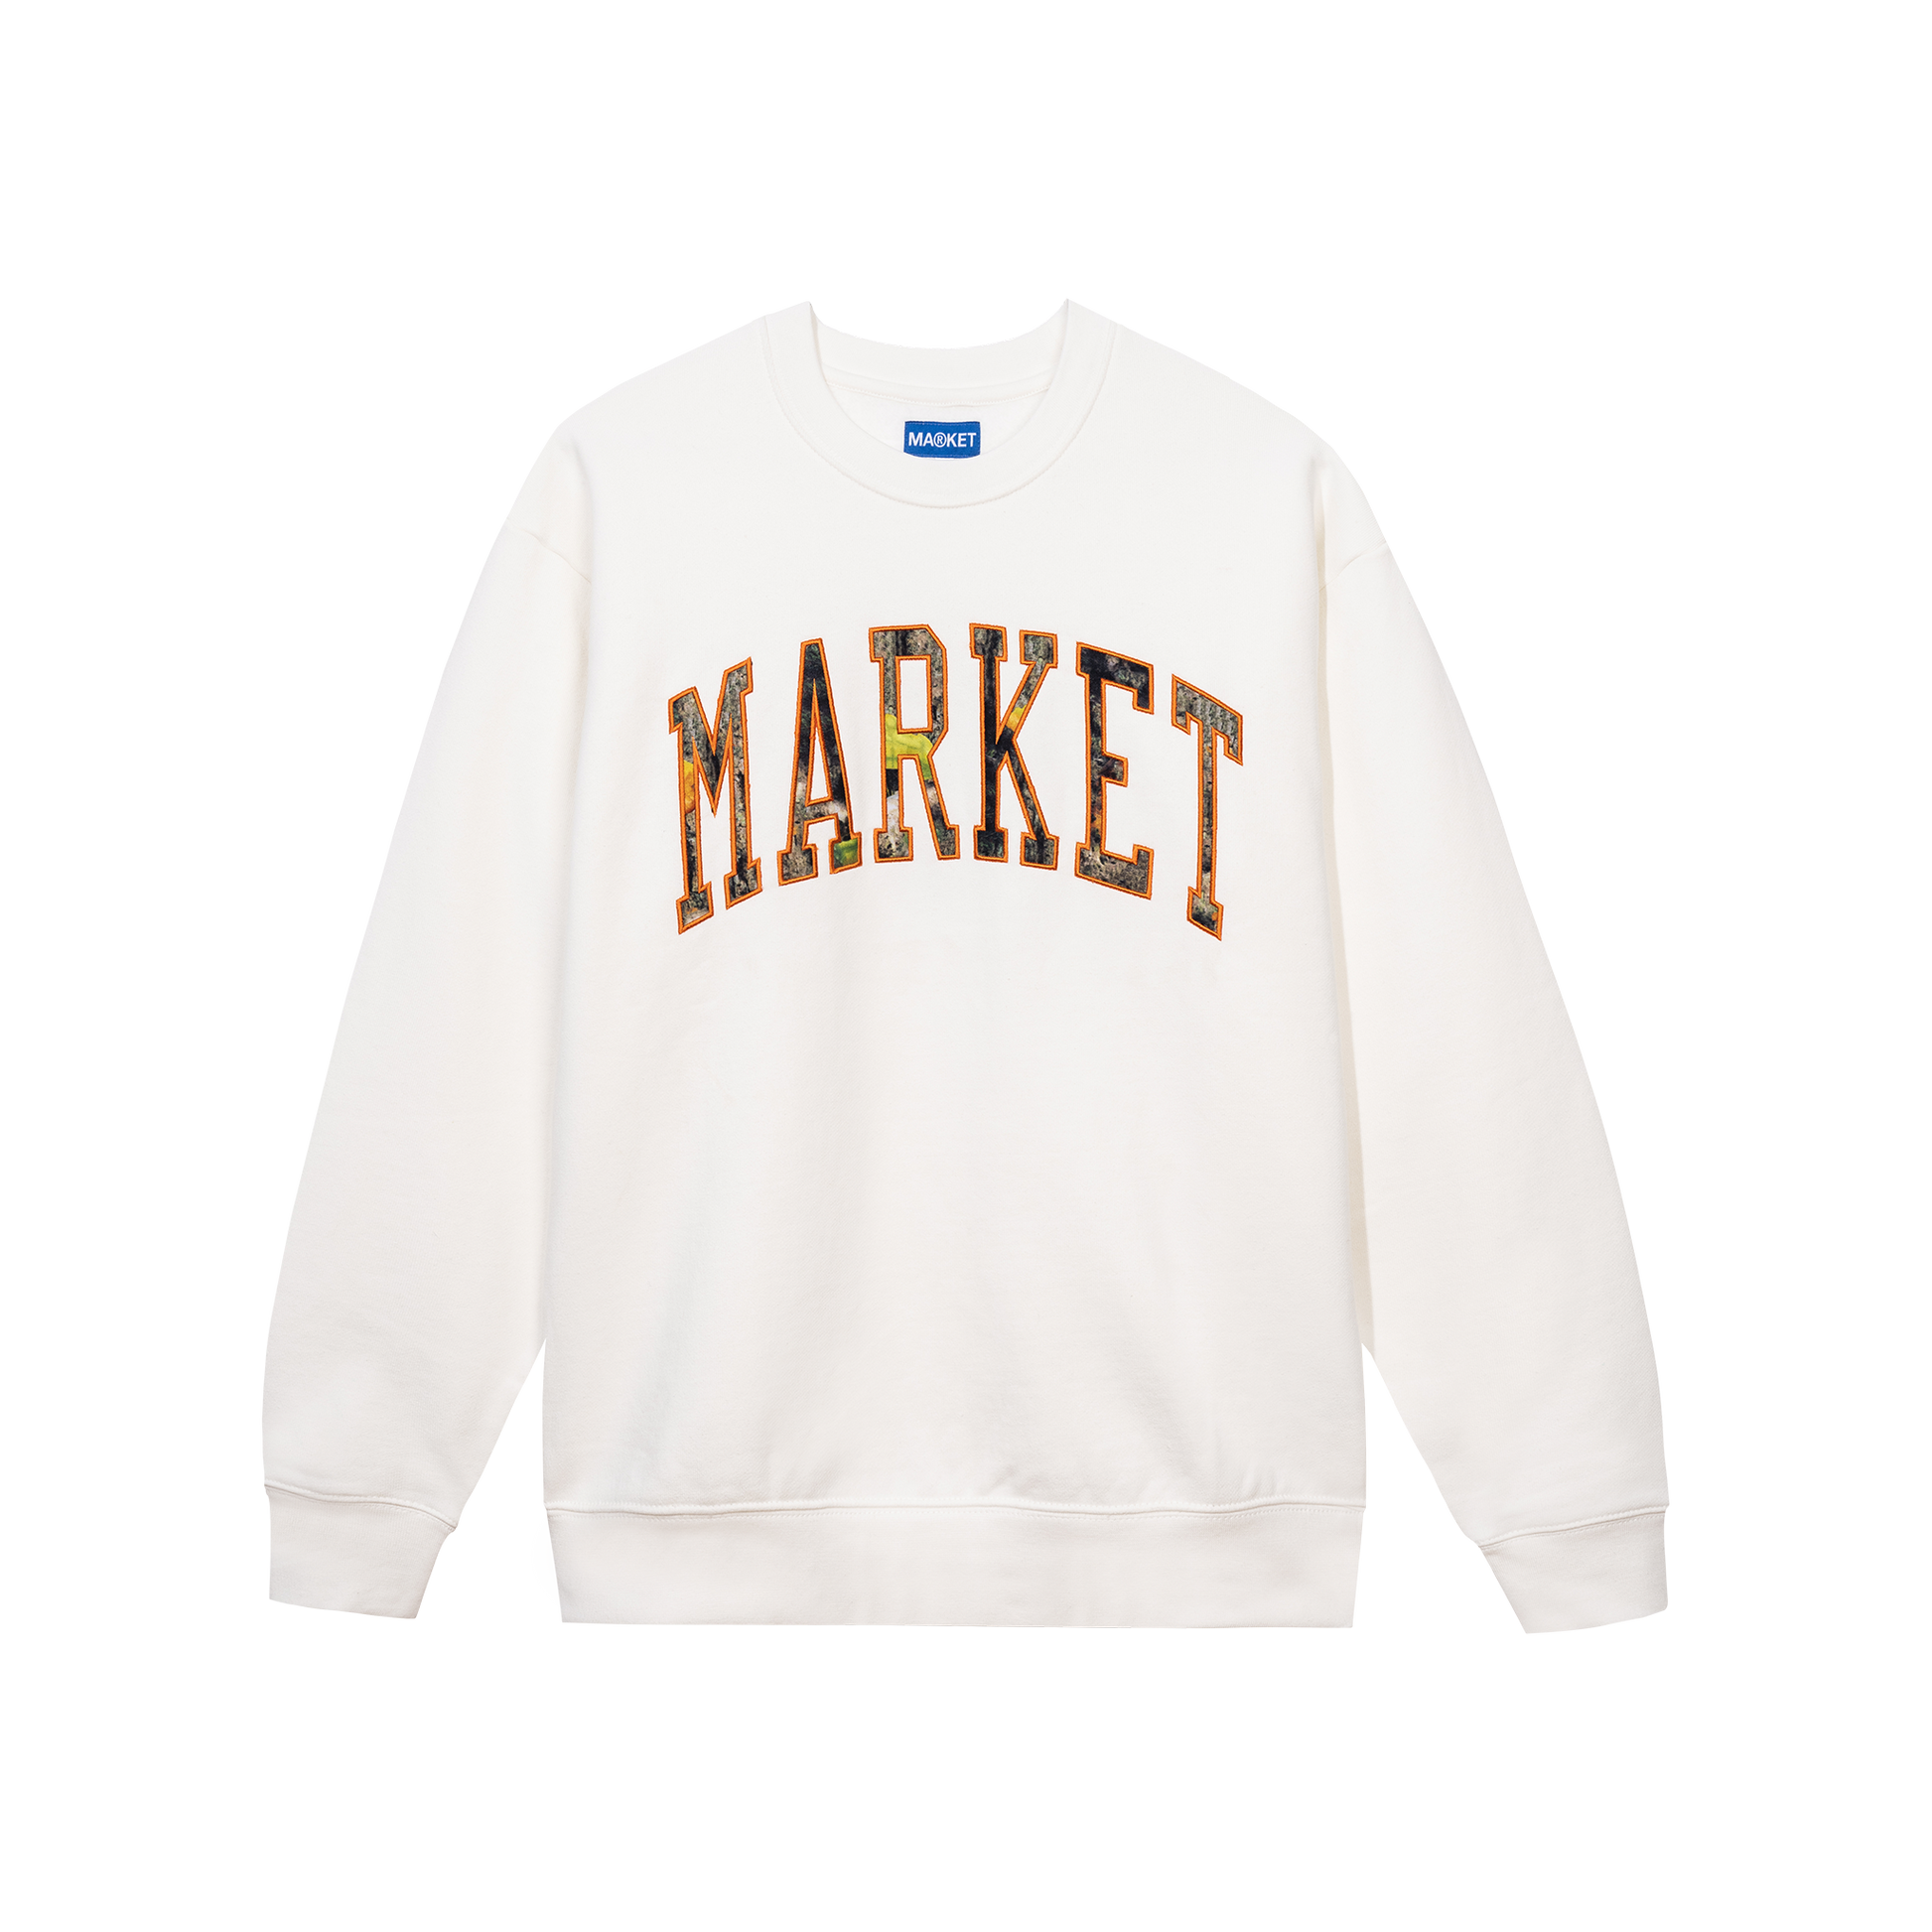 MARKET clothing brand FAUXTREE ARC CREWNECK SWEATSHIRT. Find more graphic tees and hoodies at MarketStudios.com. Formally Chinatown Market.